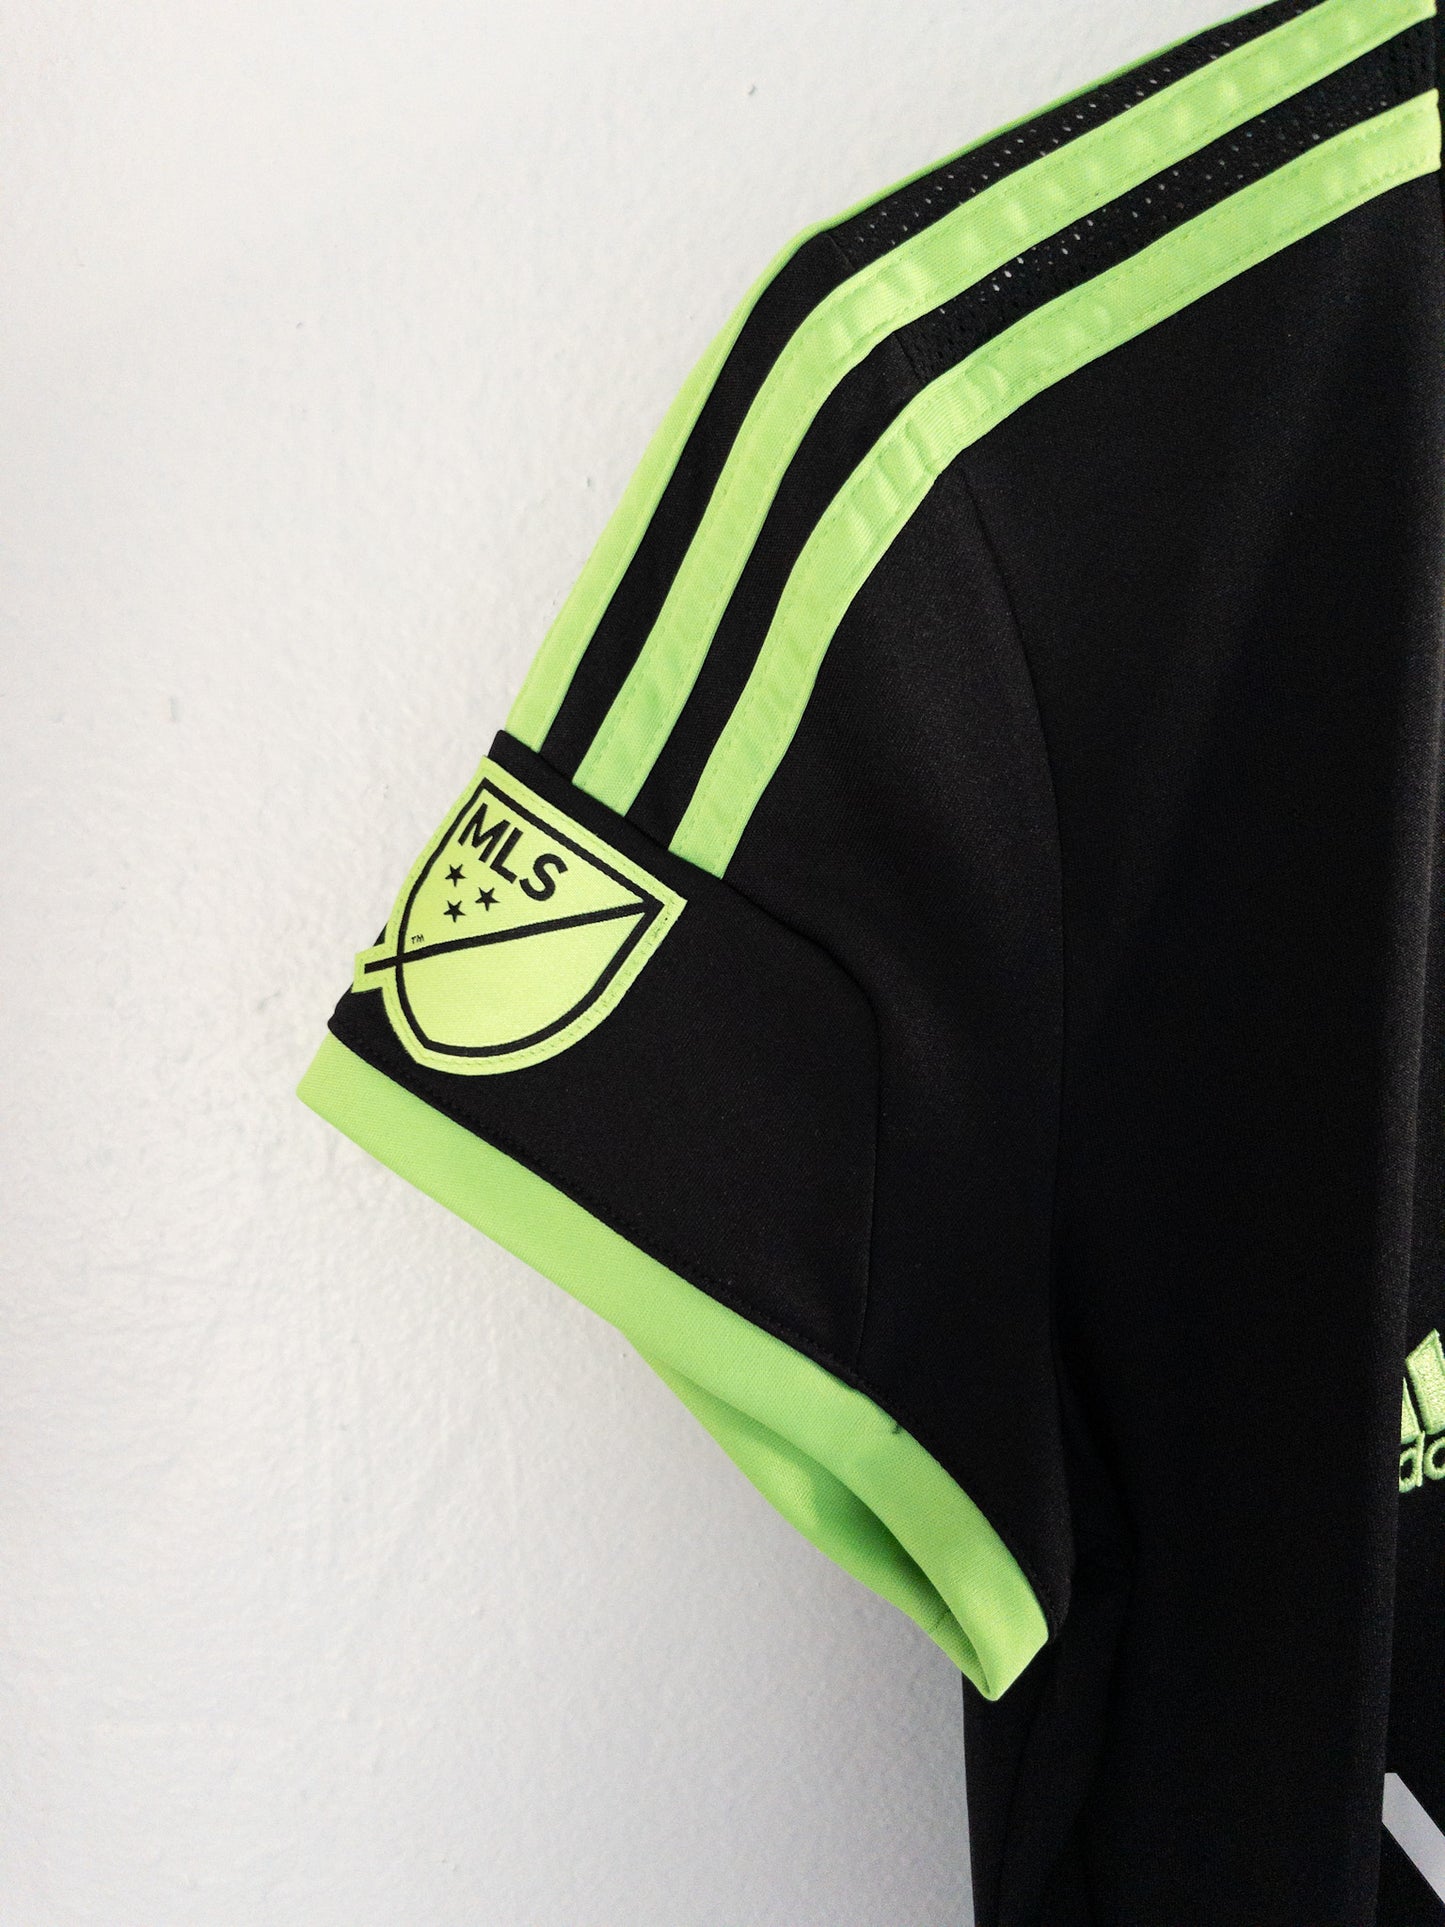 2015 Sounders Halo 5 Guardians Third Kit